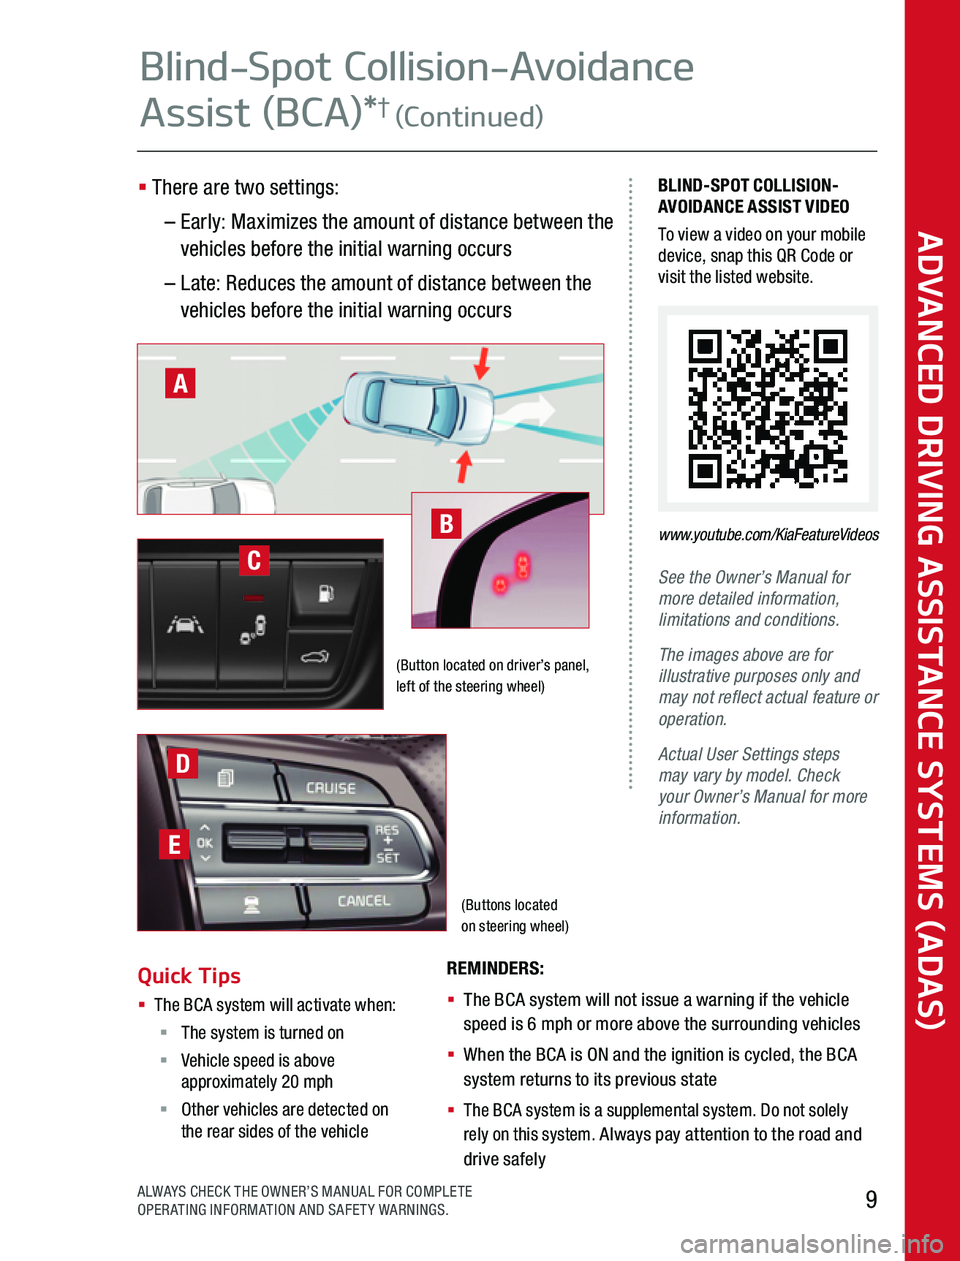 KIA OPTIMA HYBRID 2020  Advanced Driving Assistance System (Buttons located  on steering wheel)
BLIND-SPOT COLLISION-AVOIDANCE ASSIST VIDEOTo view a video on your mobile device, snap this QR Code or visit the listed website  
See the Owner’s Manual for more